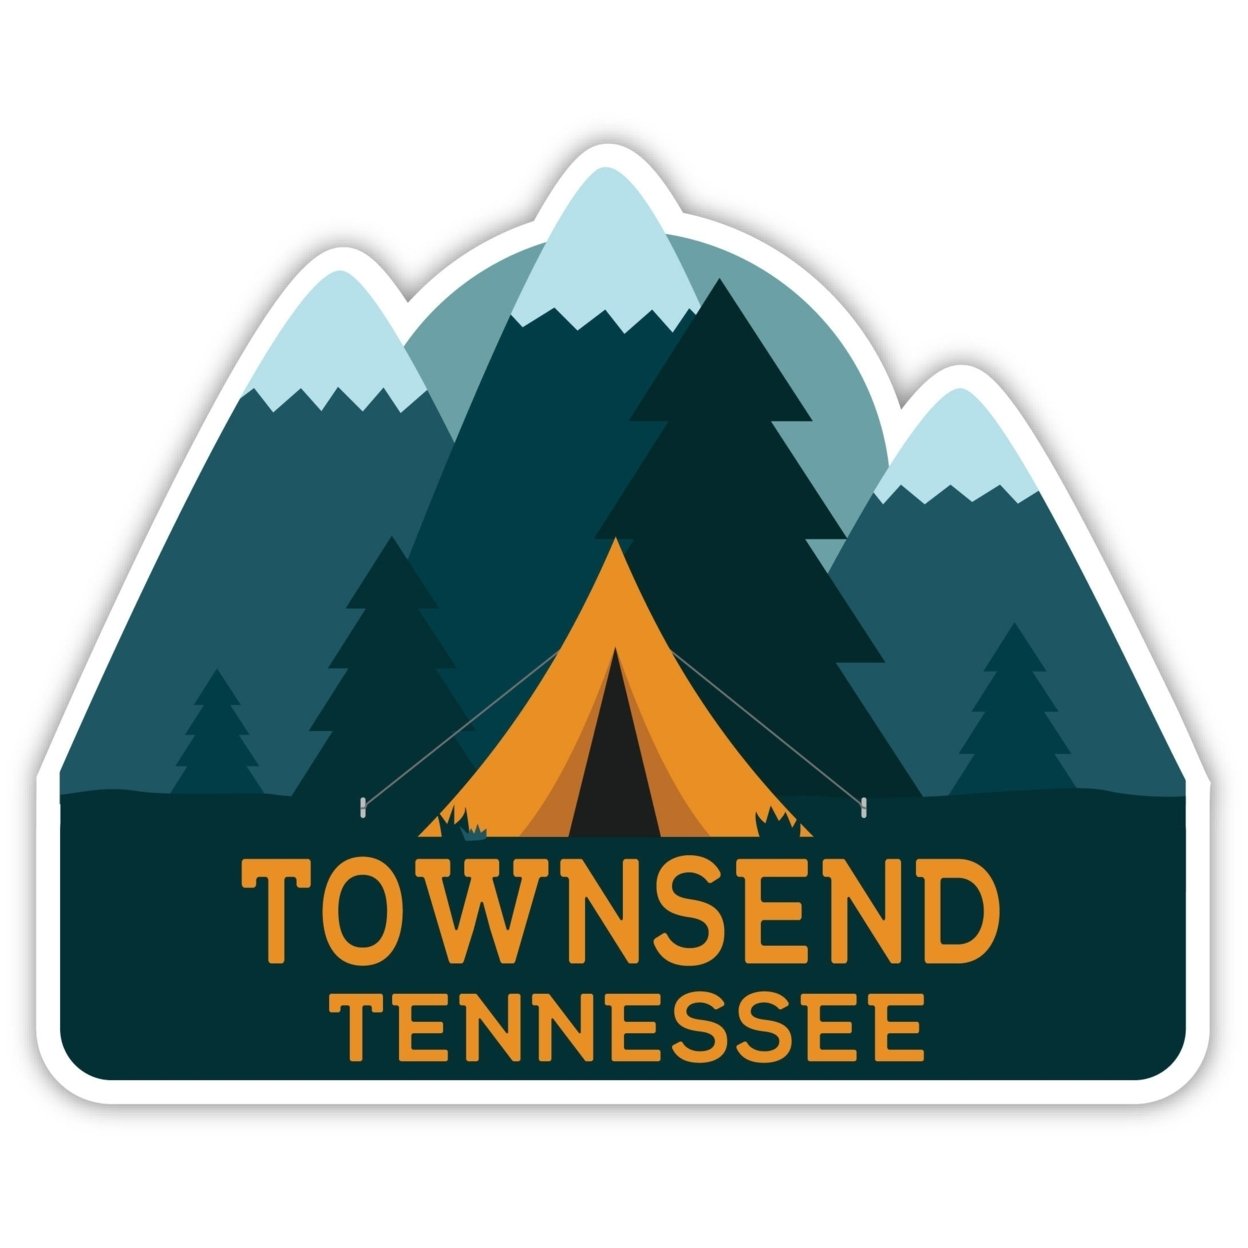 Townsend Tennessee Souvenir Decorative Stickers (Choose Theme And Size) - Single Unit, 4-Inch, Adventures Awaits